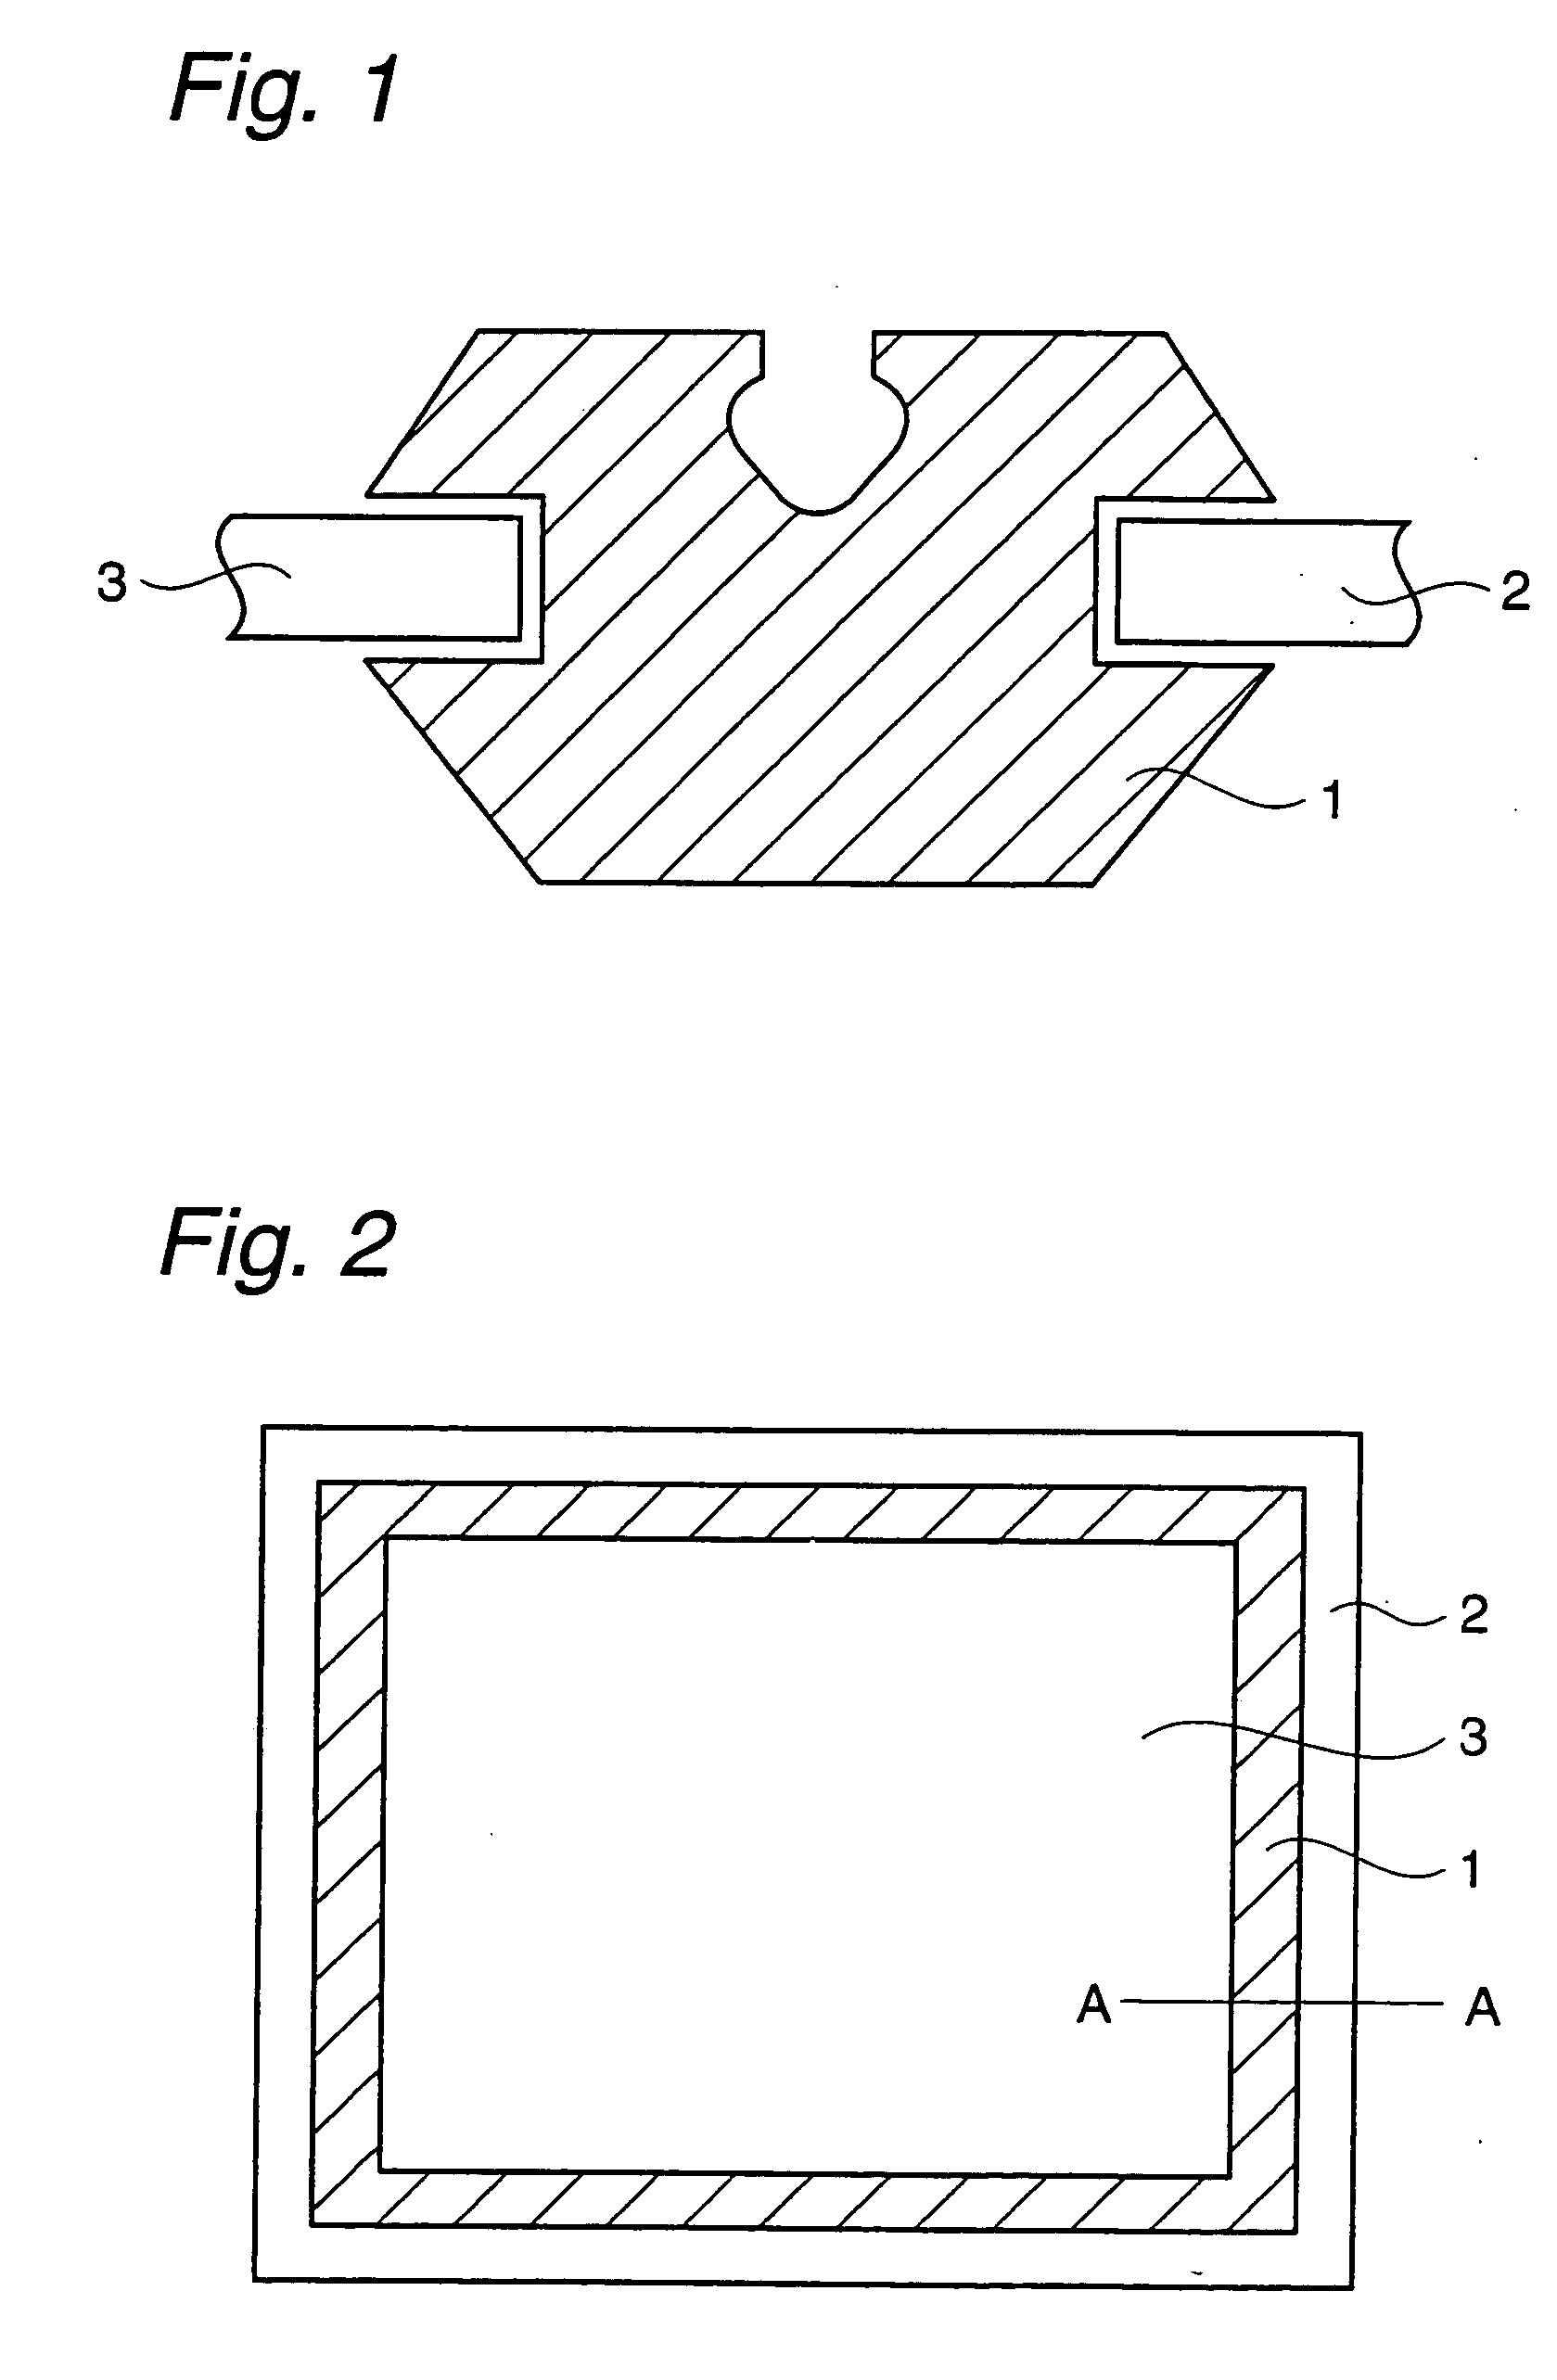 Crosslinkable rubber compositions and uses thereof